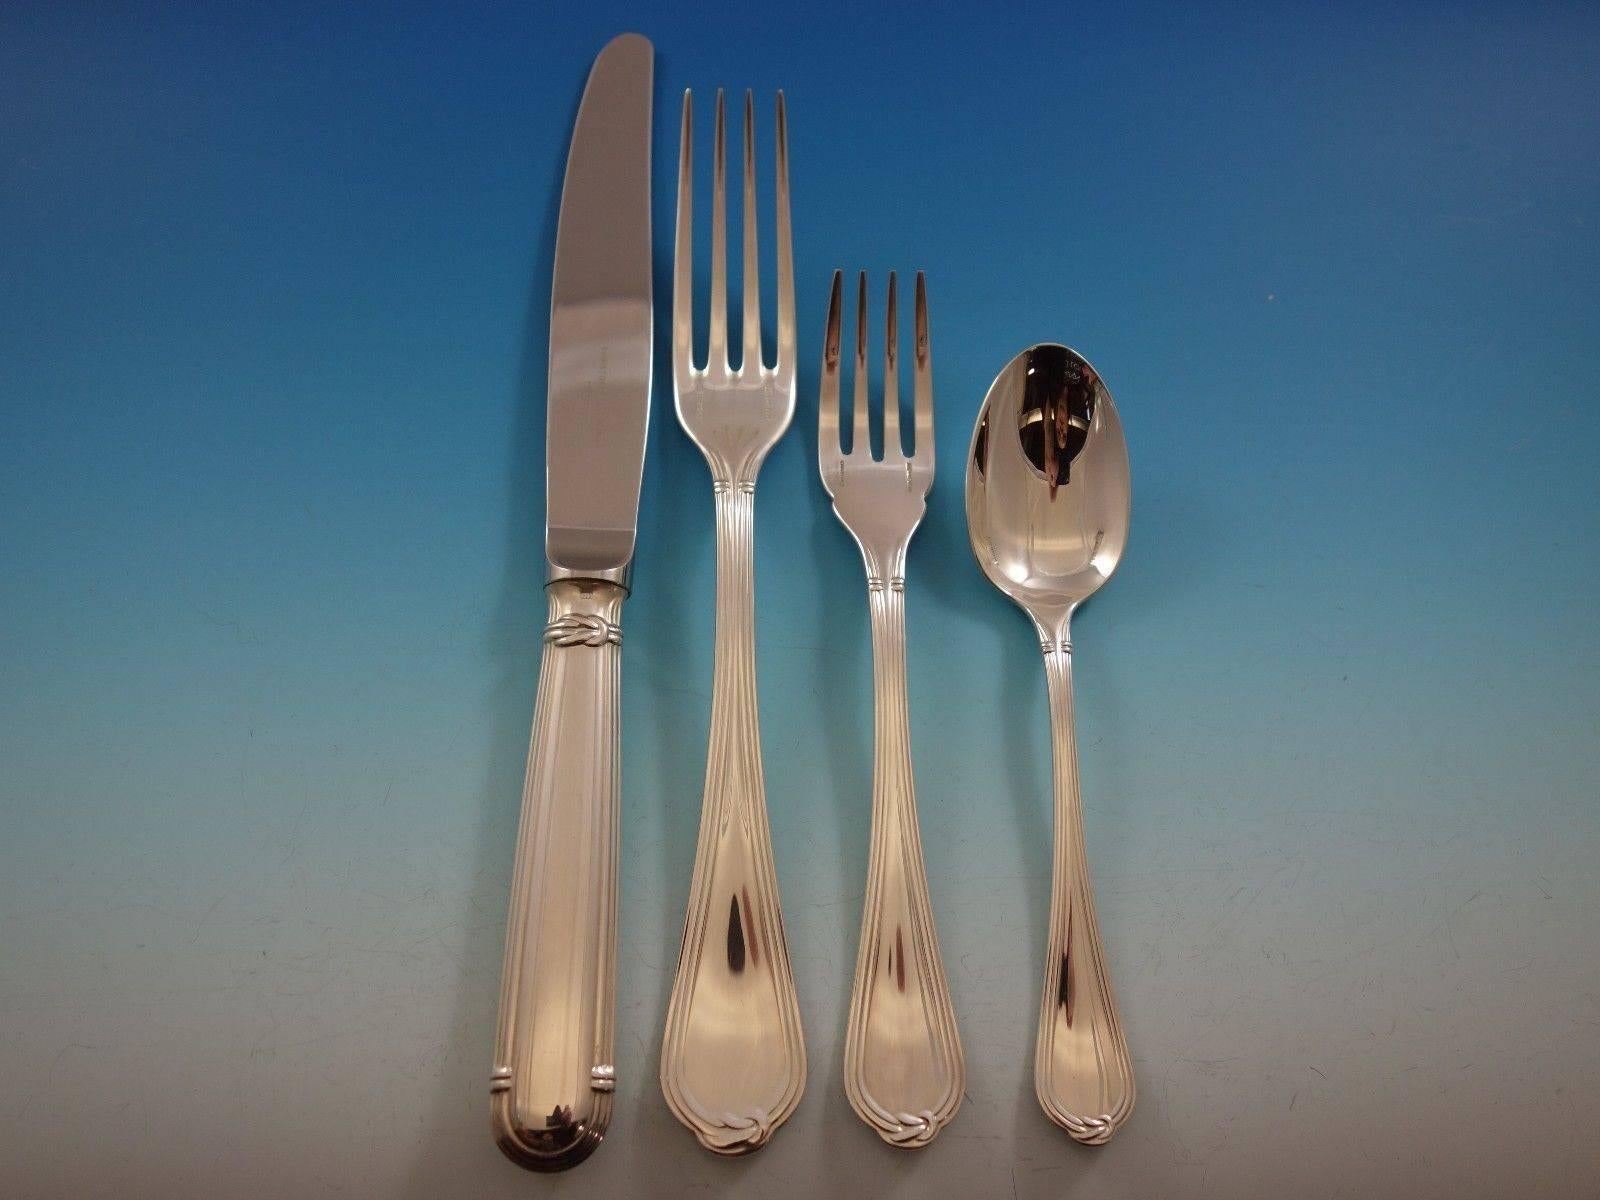 Oceana by Christofle sterling silver flatware set, 95 pieces. This set includes: 

Eight dinner size knives, 9 3/4